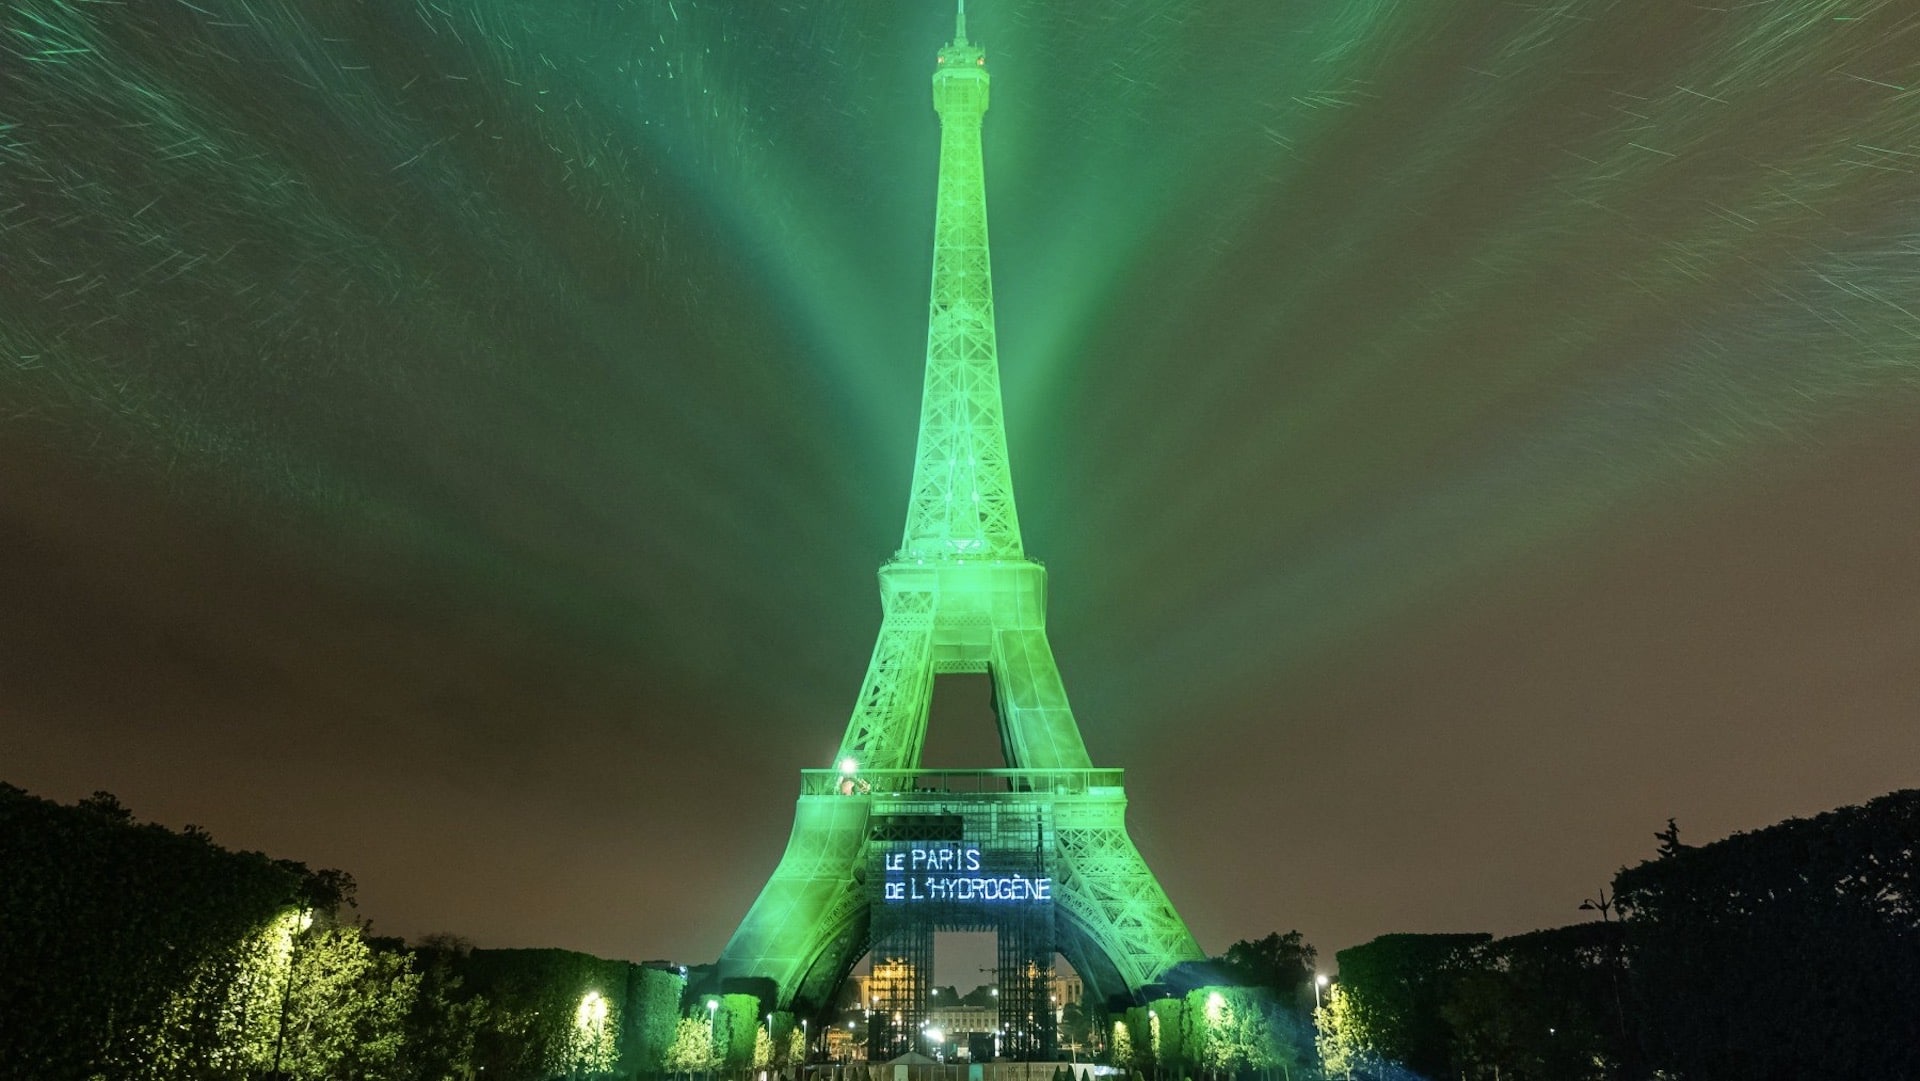 The Eiffel Tower on May 26